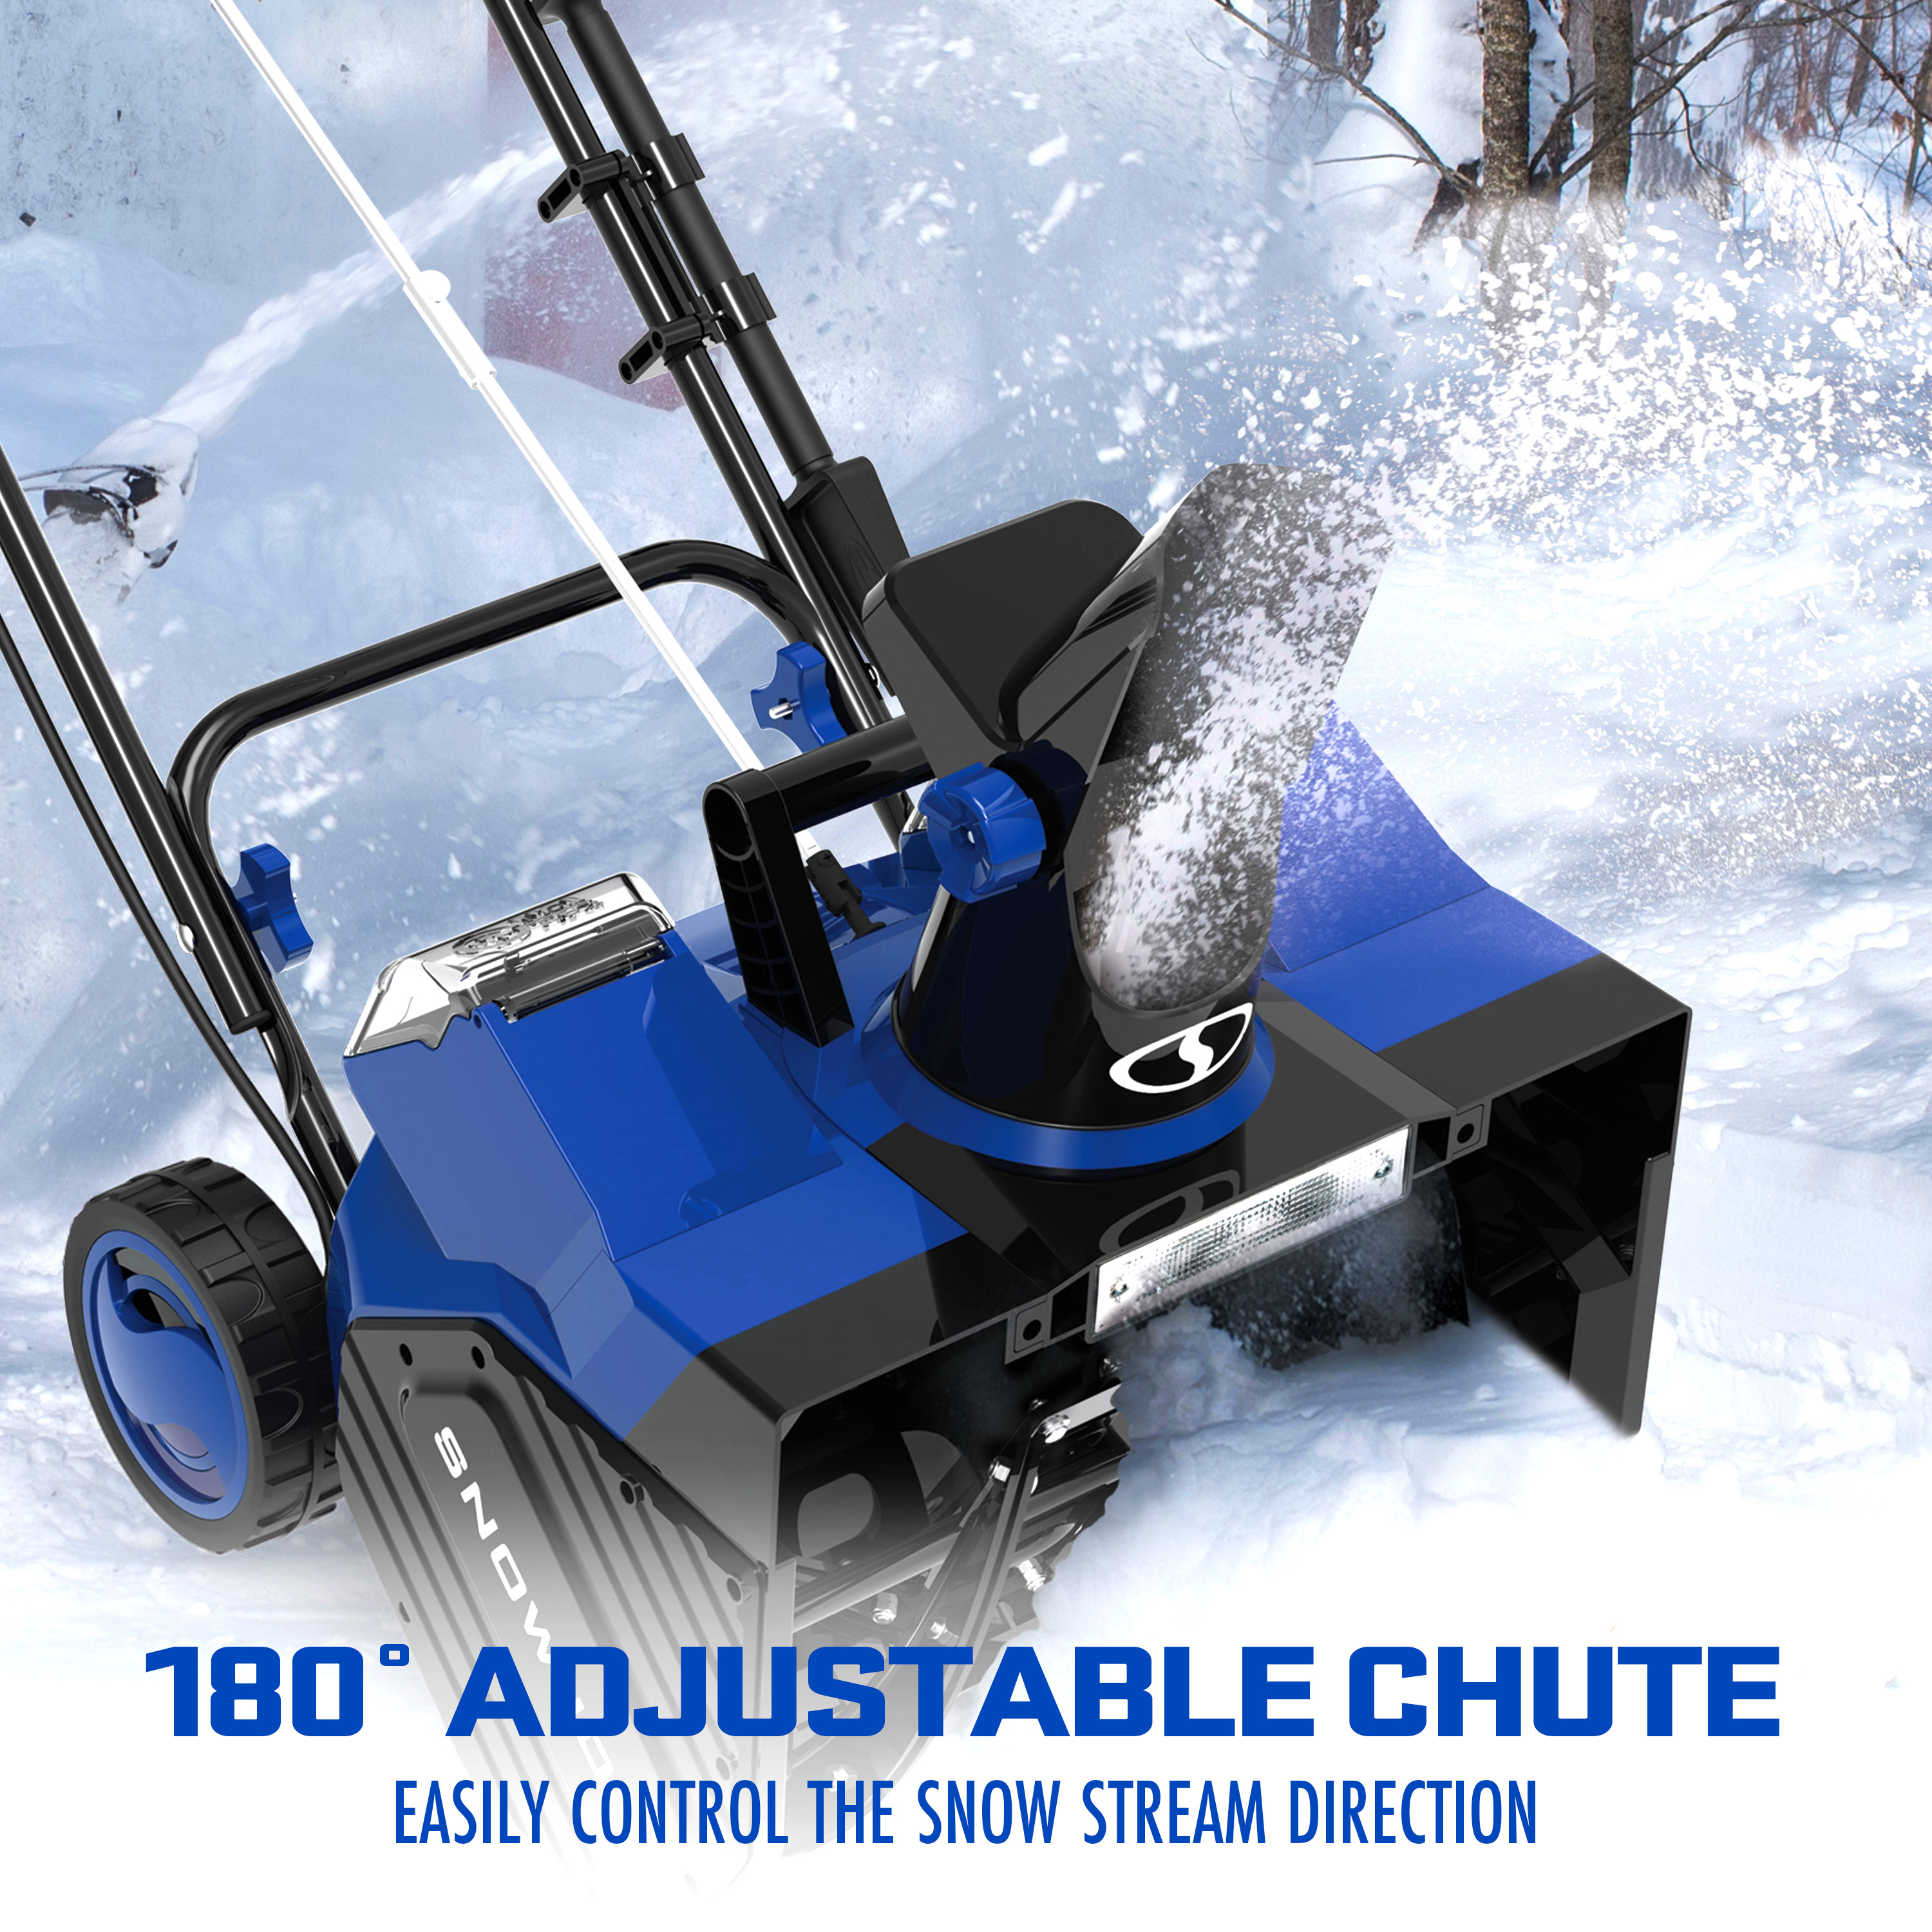 Snow Joe 48V 18-inch Single-Stage Cordless Snow Blower W/ Headlight, Brushless 1200W Motor, 2 x 4.0-Ah Batteries & Charger - image 6 of 18